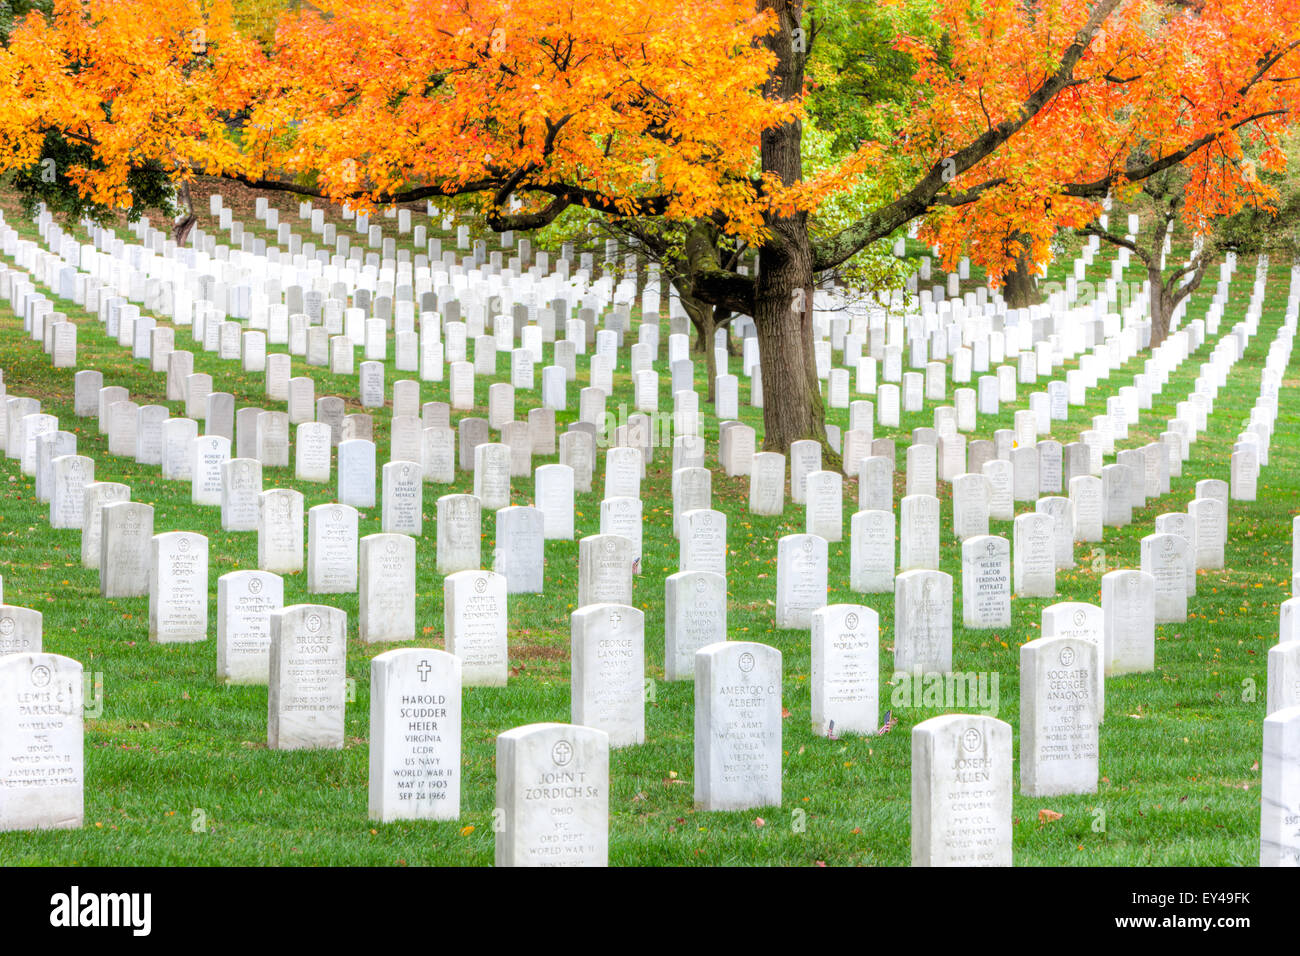 Maple trees add peak fall color to the grounds of Arlington National Cemetery in Arlington, Virginia. Stock Photo